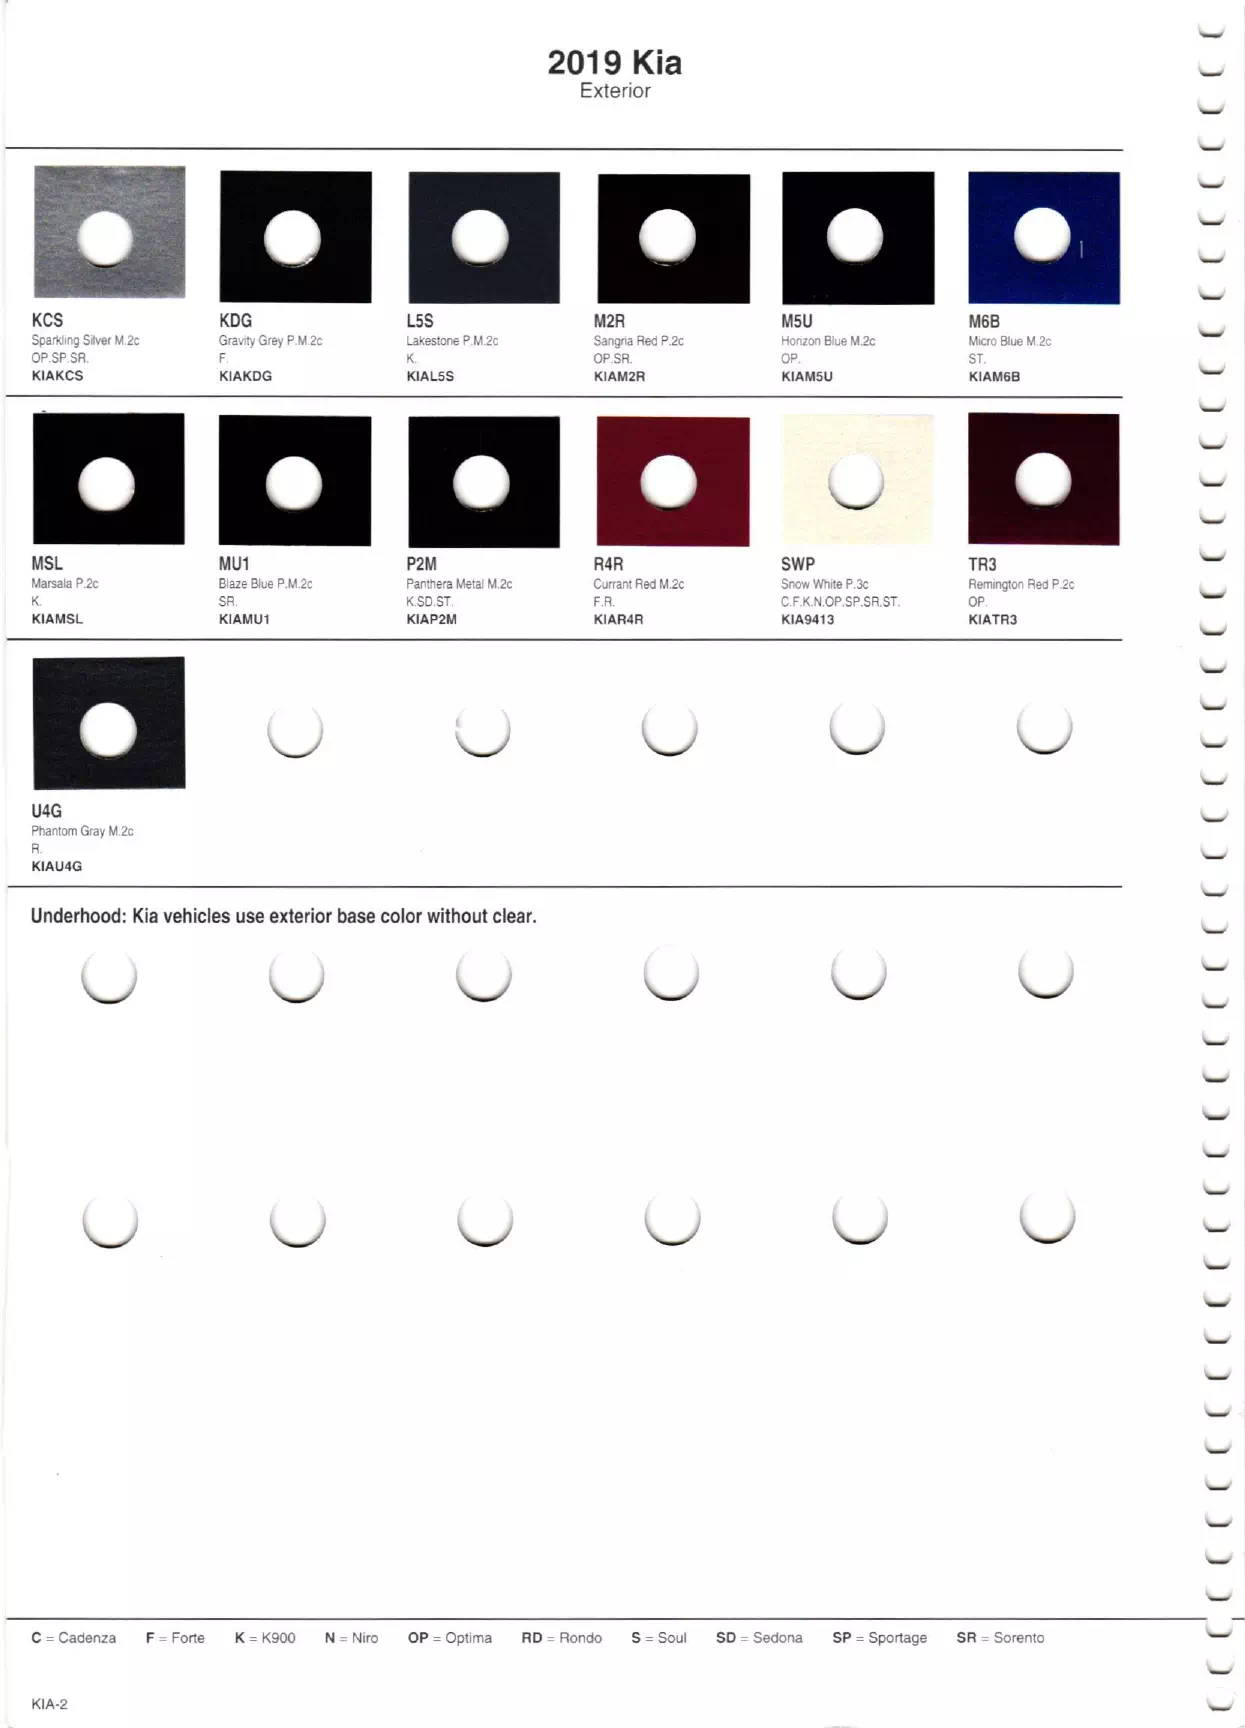 Paint Swatches used on kia with their codes and mixing stock numbers in 2019